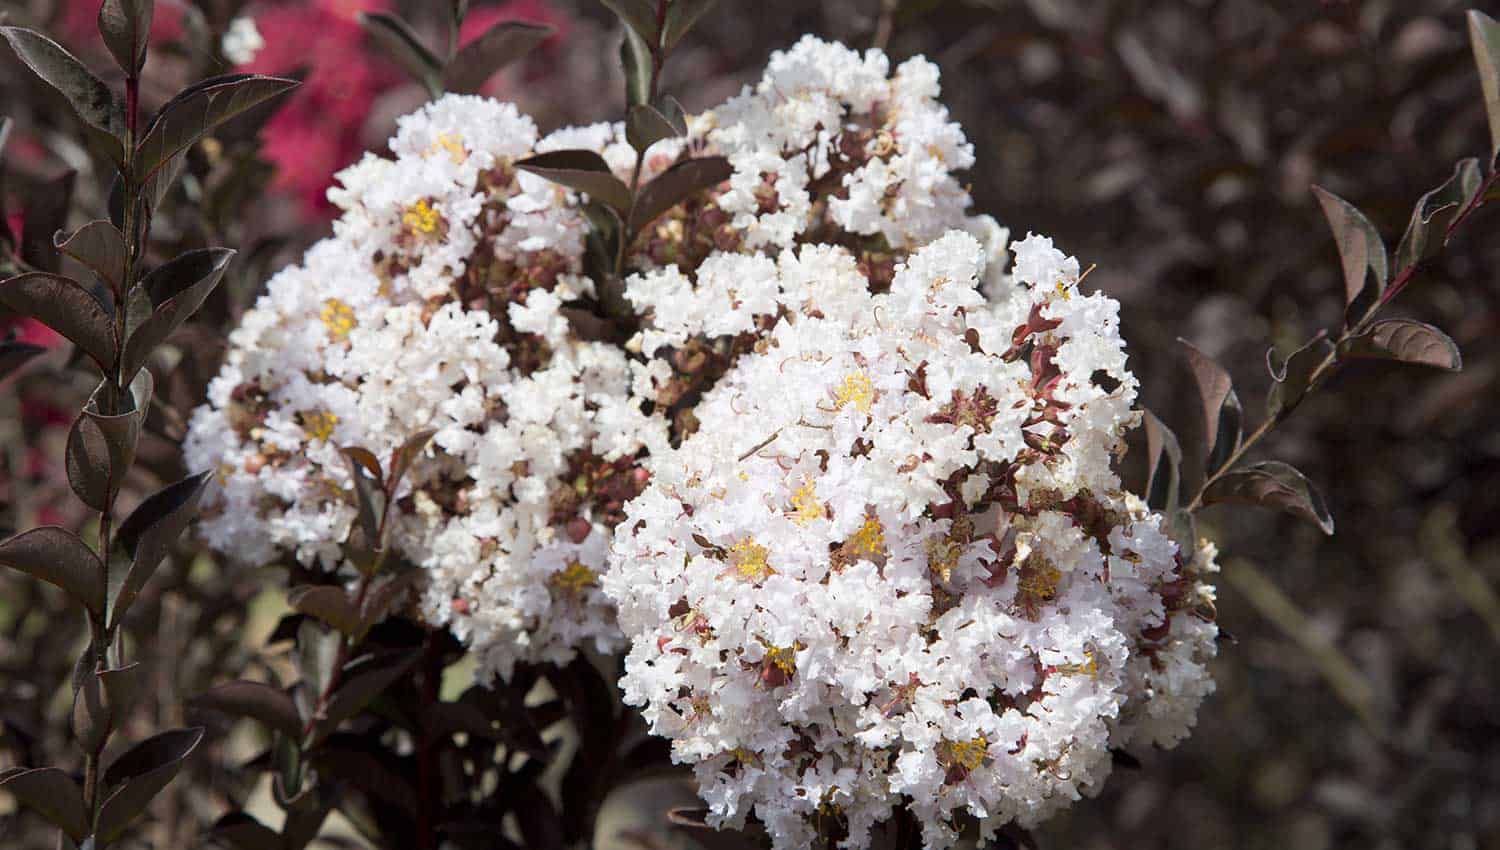 White crapemyrtle blooms and chocolate colored foliage of Delta Moonlight